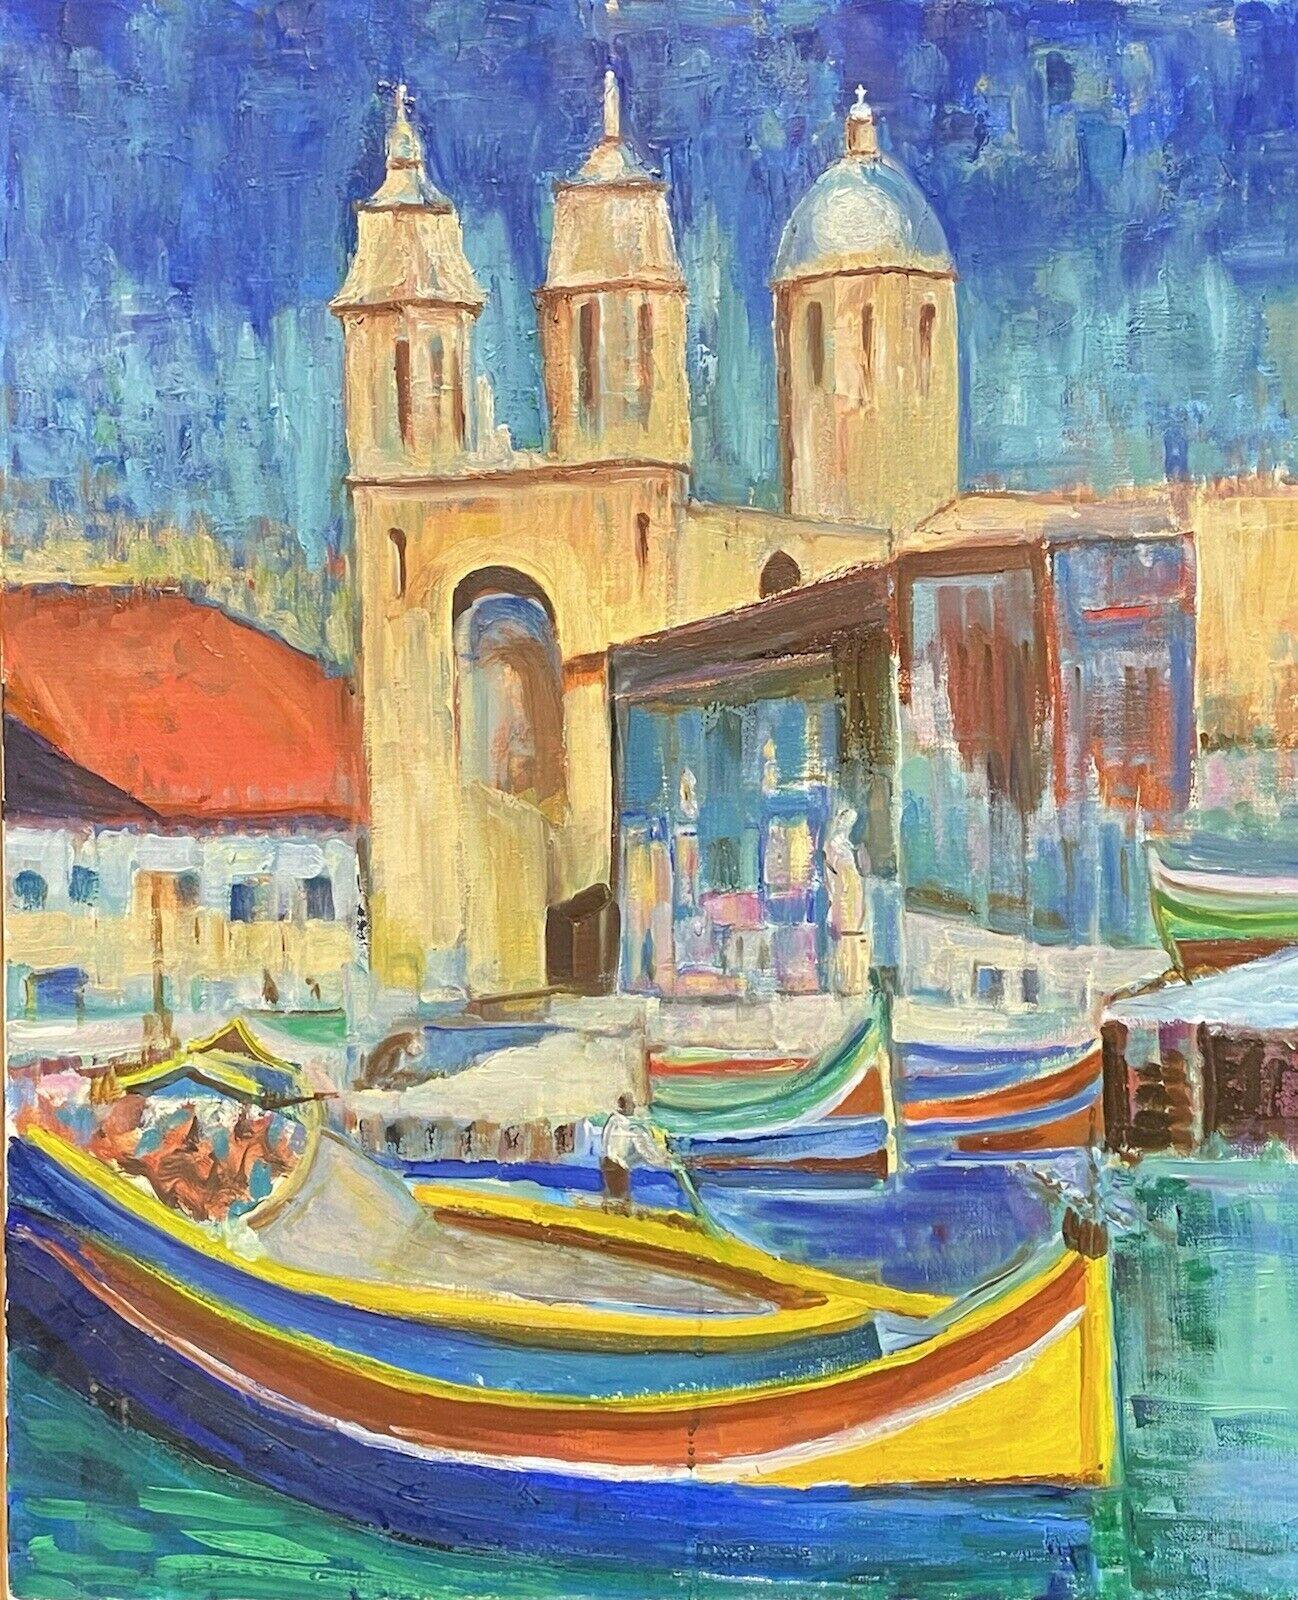 Artist/ School: Claudine Riboulet (French 1924-2013), signed

Title: Boats on busy city canal 

Medium: oil painting, on canvas. 

Size: framed: 29.25 x 24.25 inches
        painting: 29 x 24 inches
        
Provenance: private collection of this